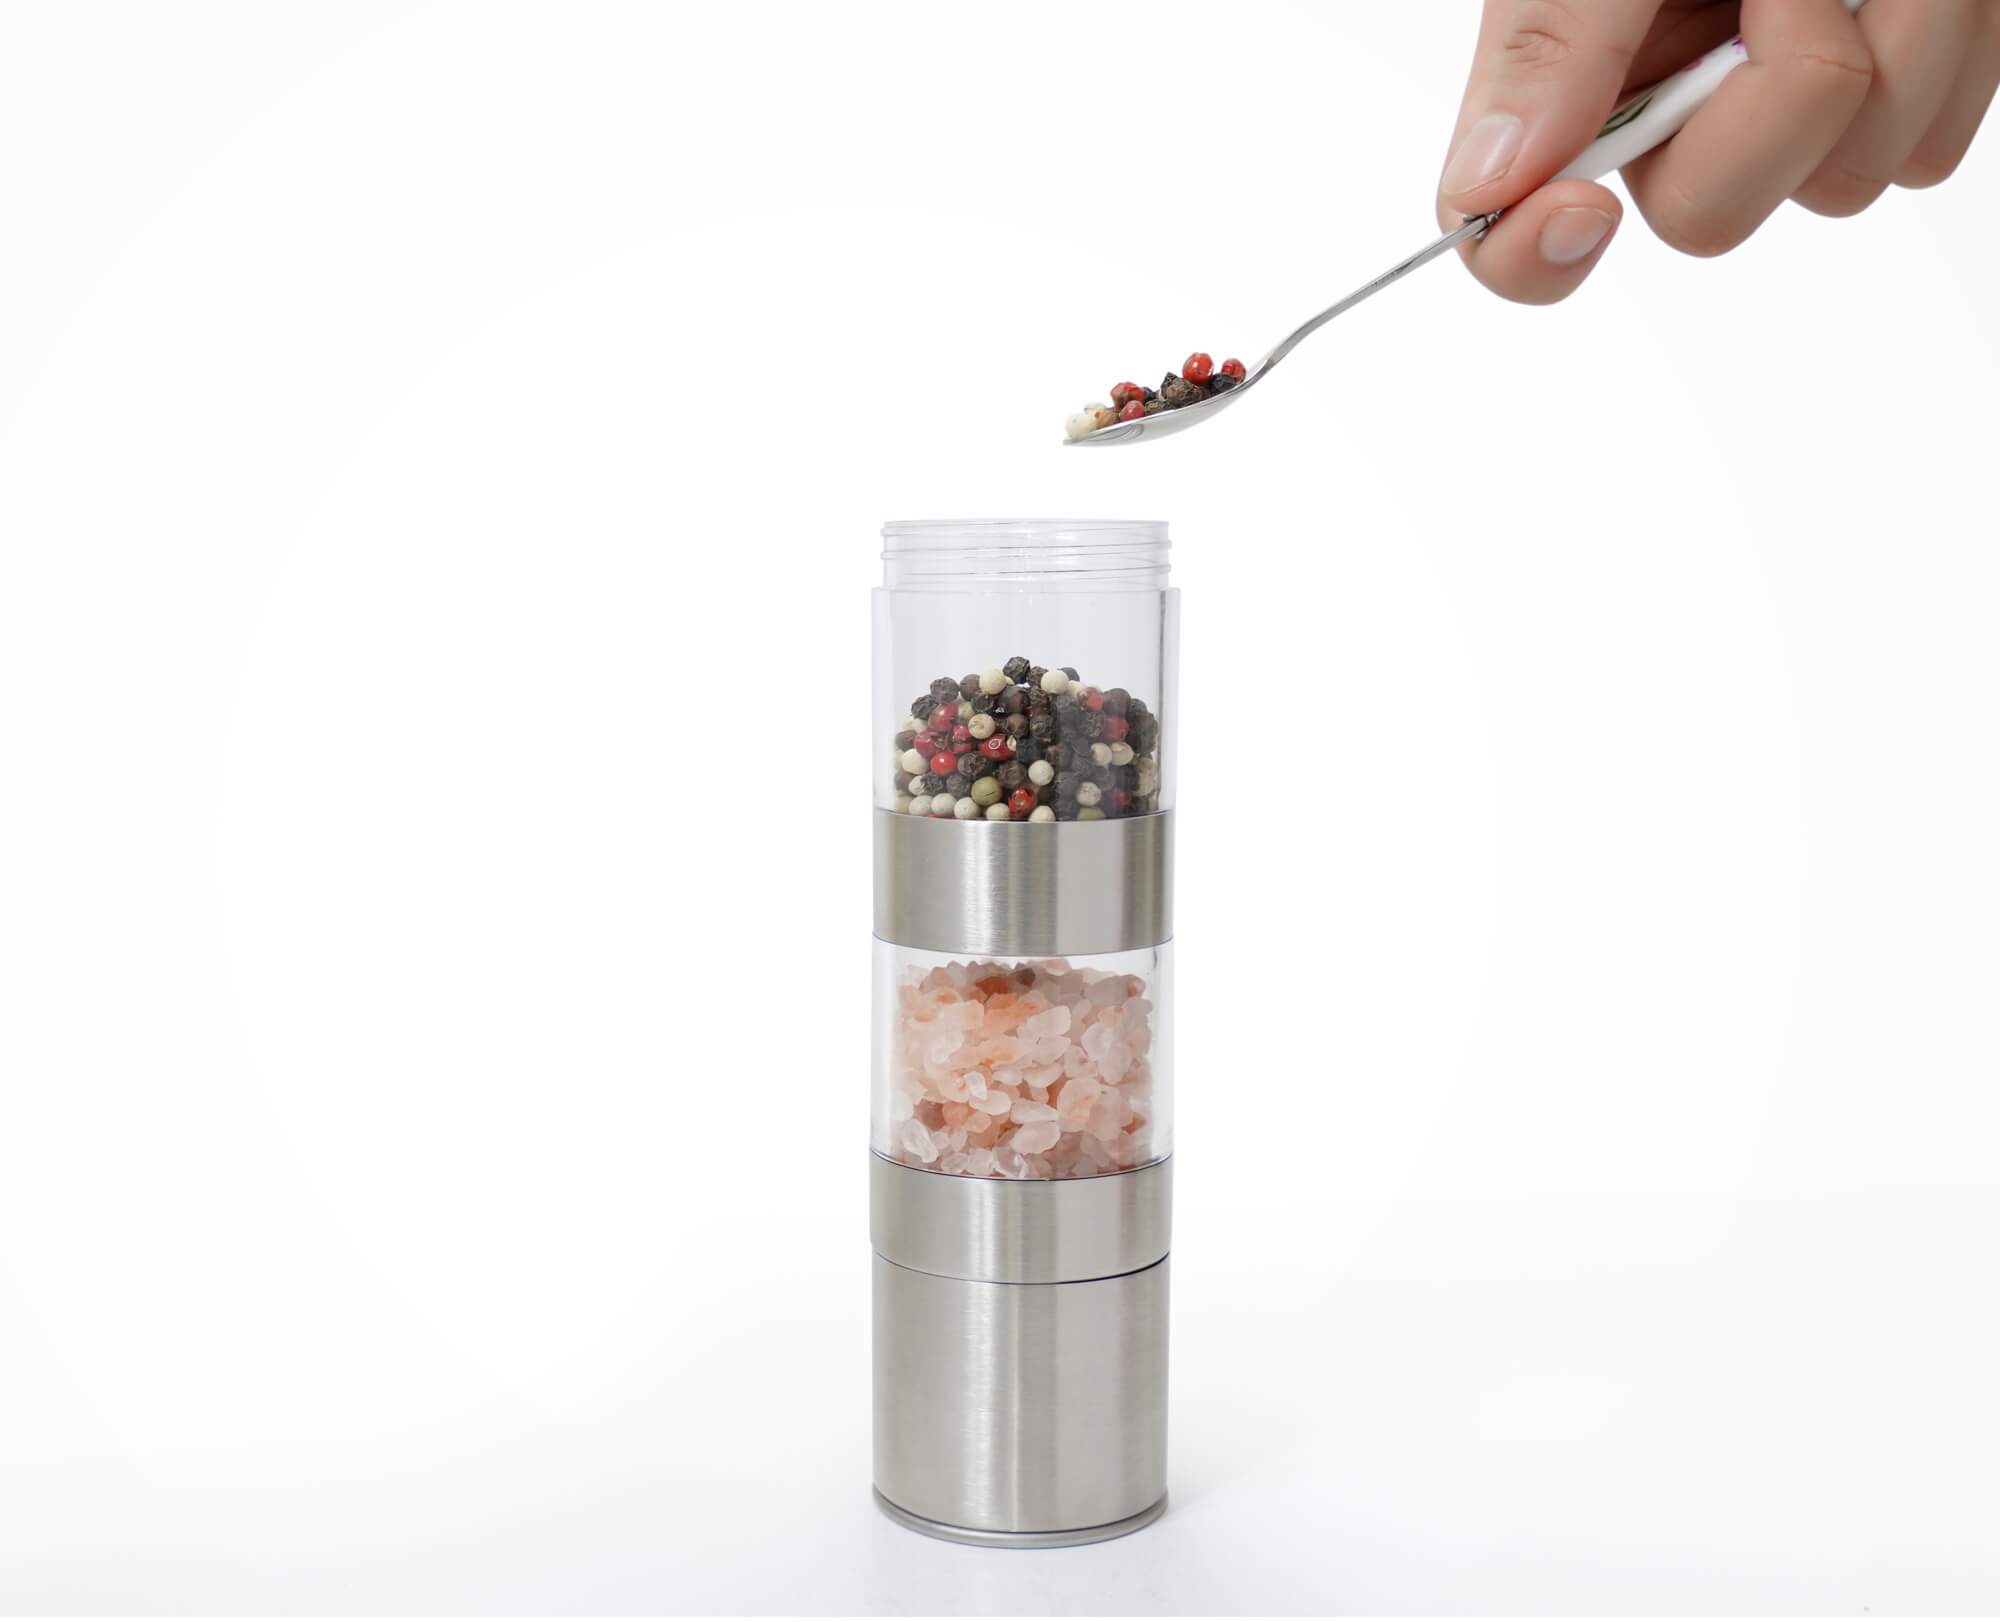 Refilling pepper to the Benchusch Modern 2 in 1 Salt and Pepper Grinder